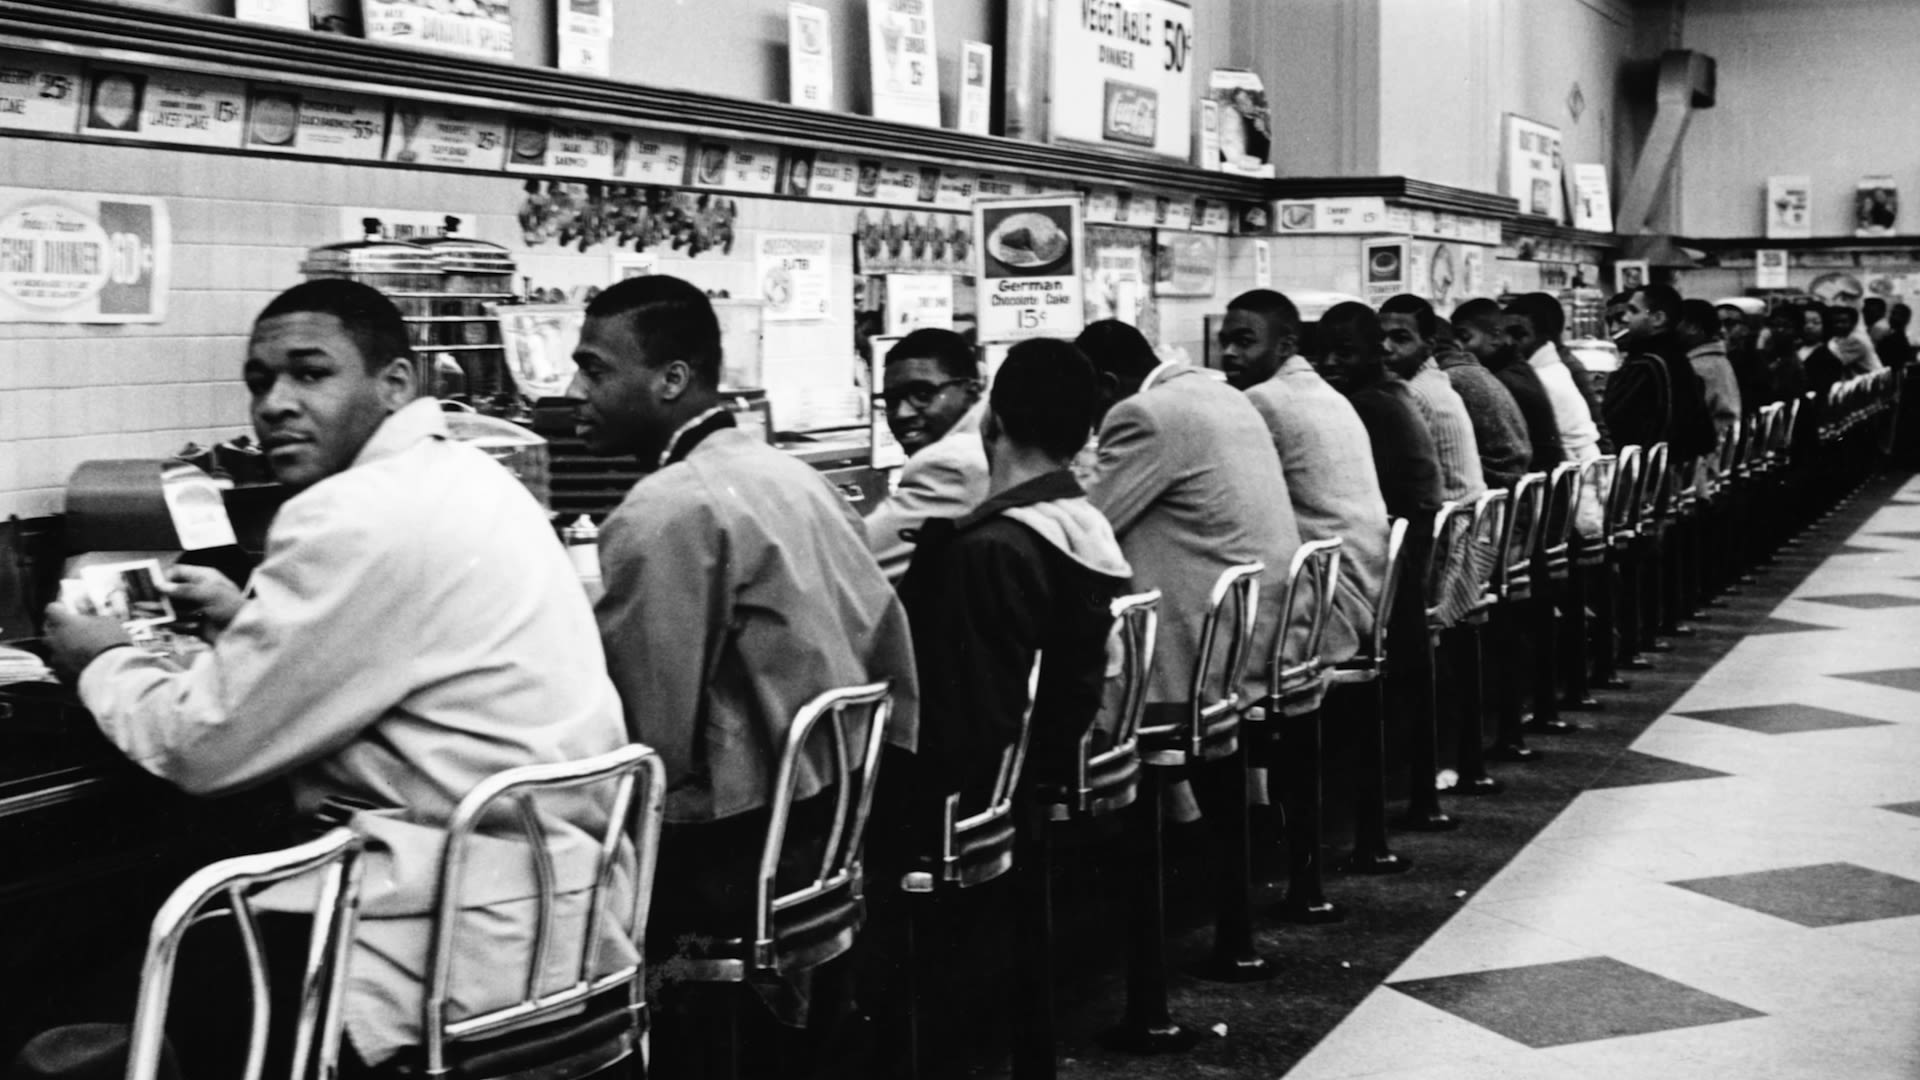 Watch How A Sit-In Movement Started By Black Students Changed